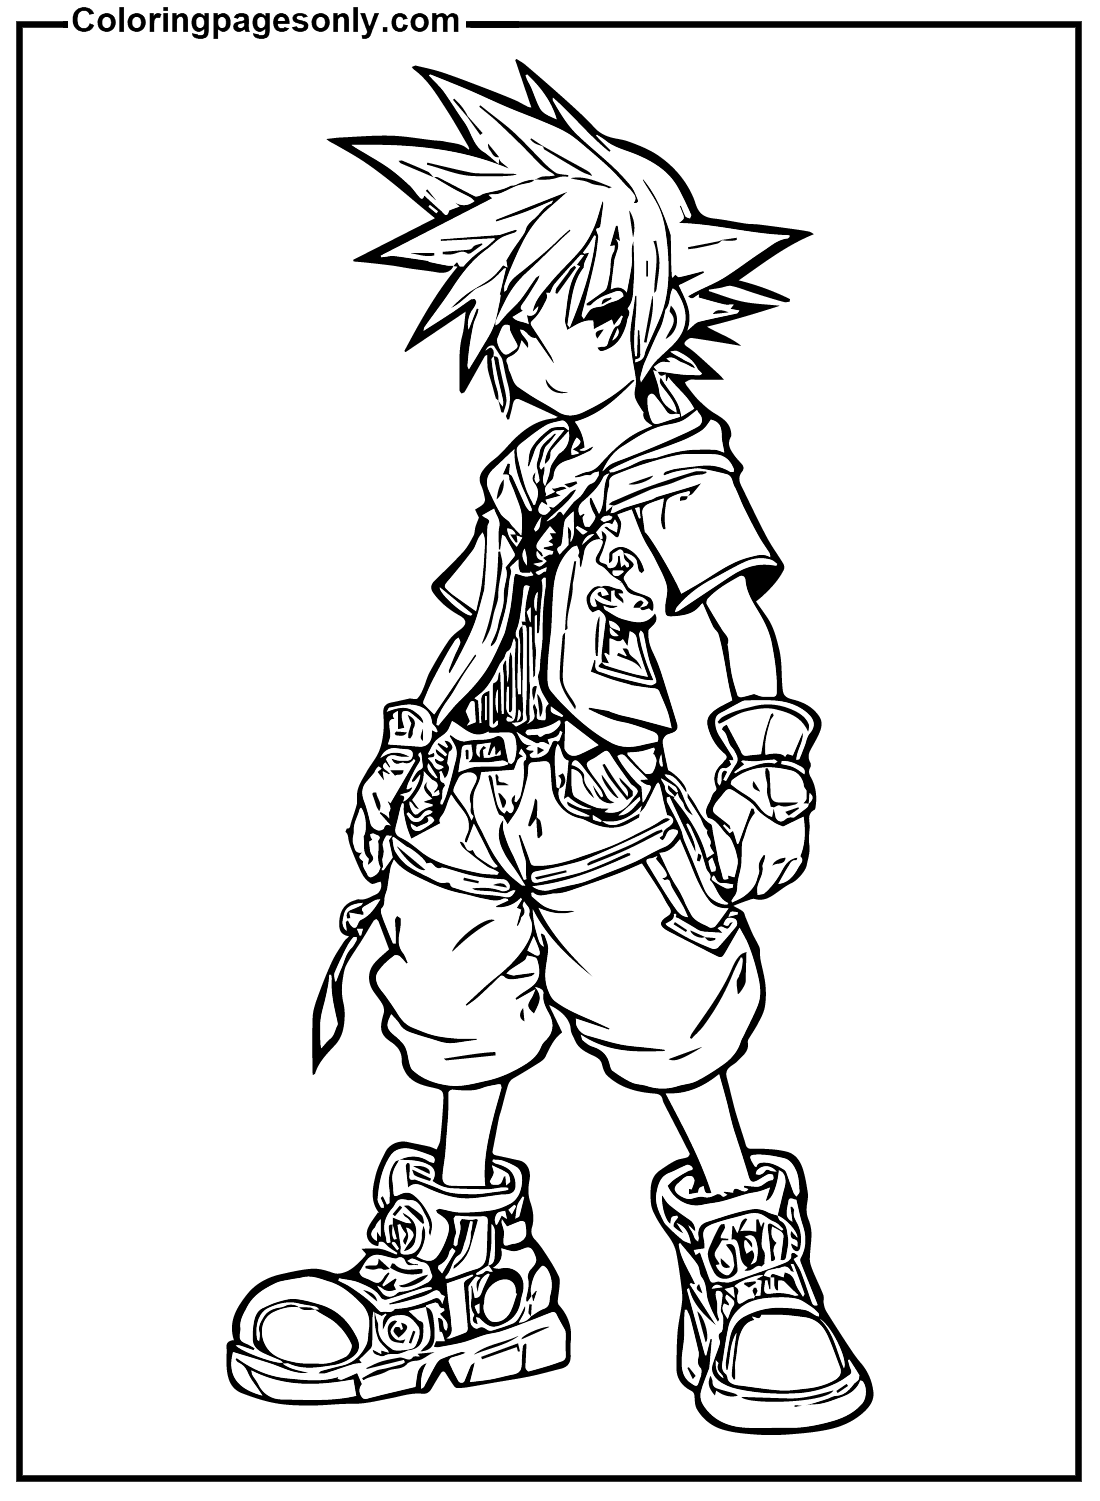 Sora From Kingdom Hearts Coloring Pages